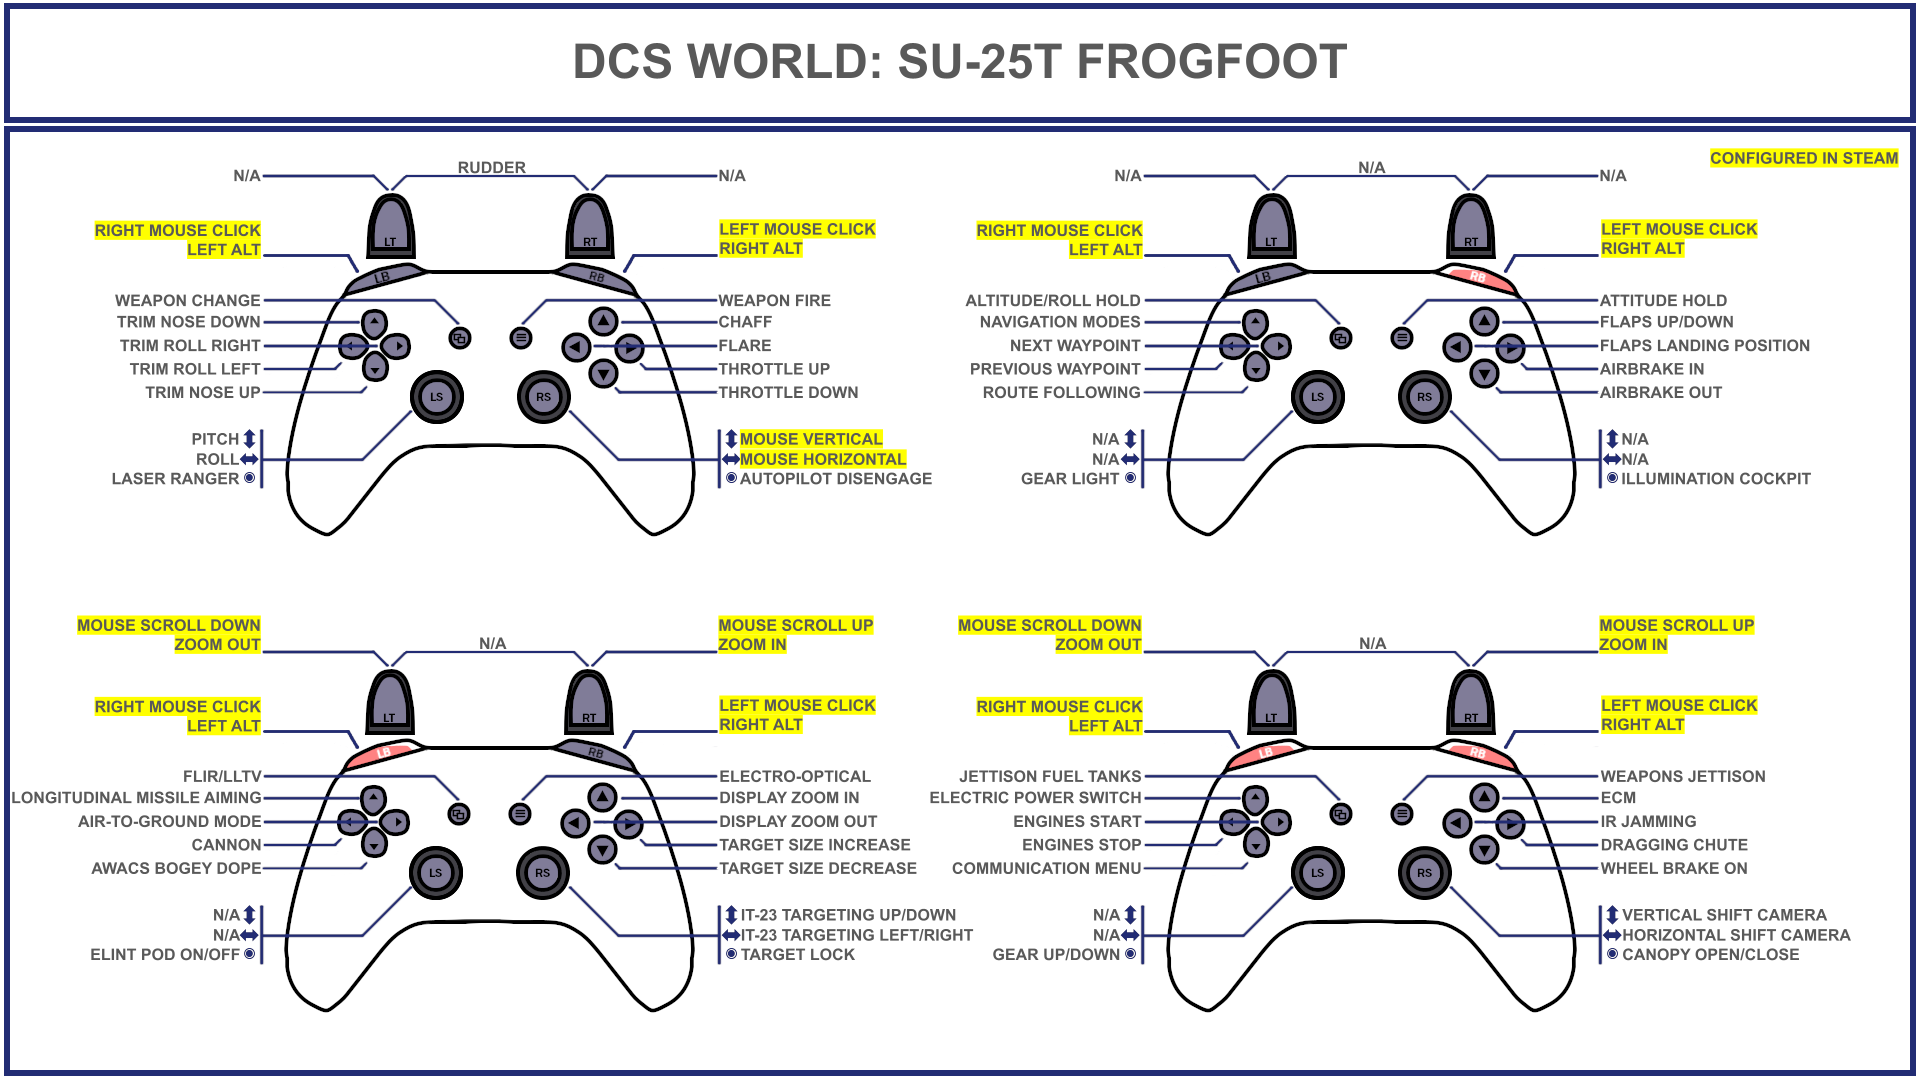 Tuuvas' Official Su-25T Frogfoot Gamepad Controller Layout